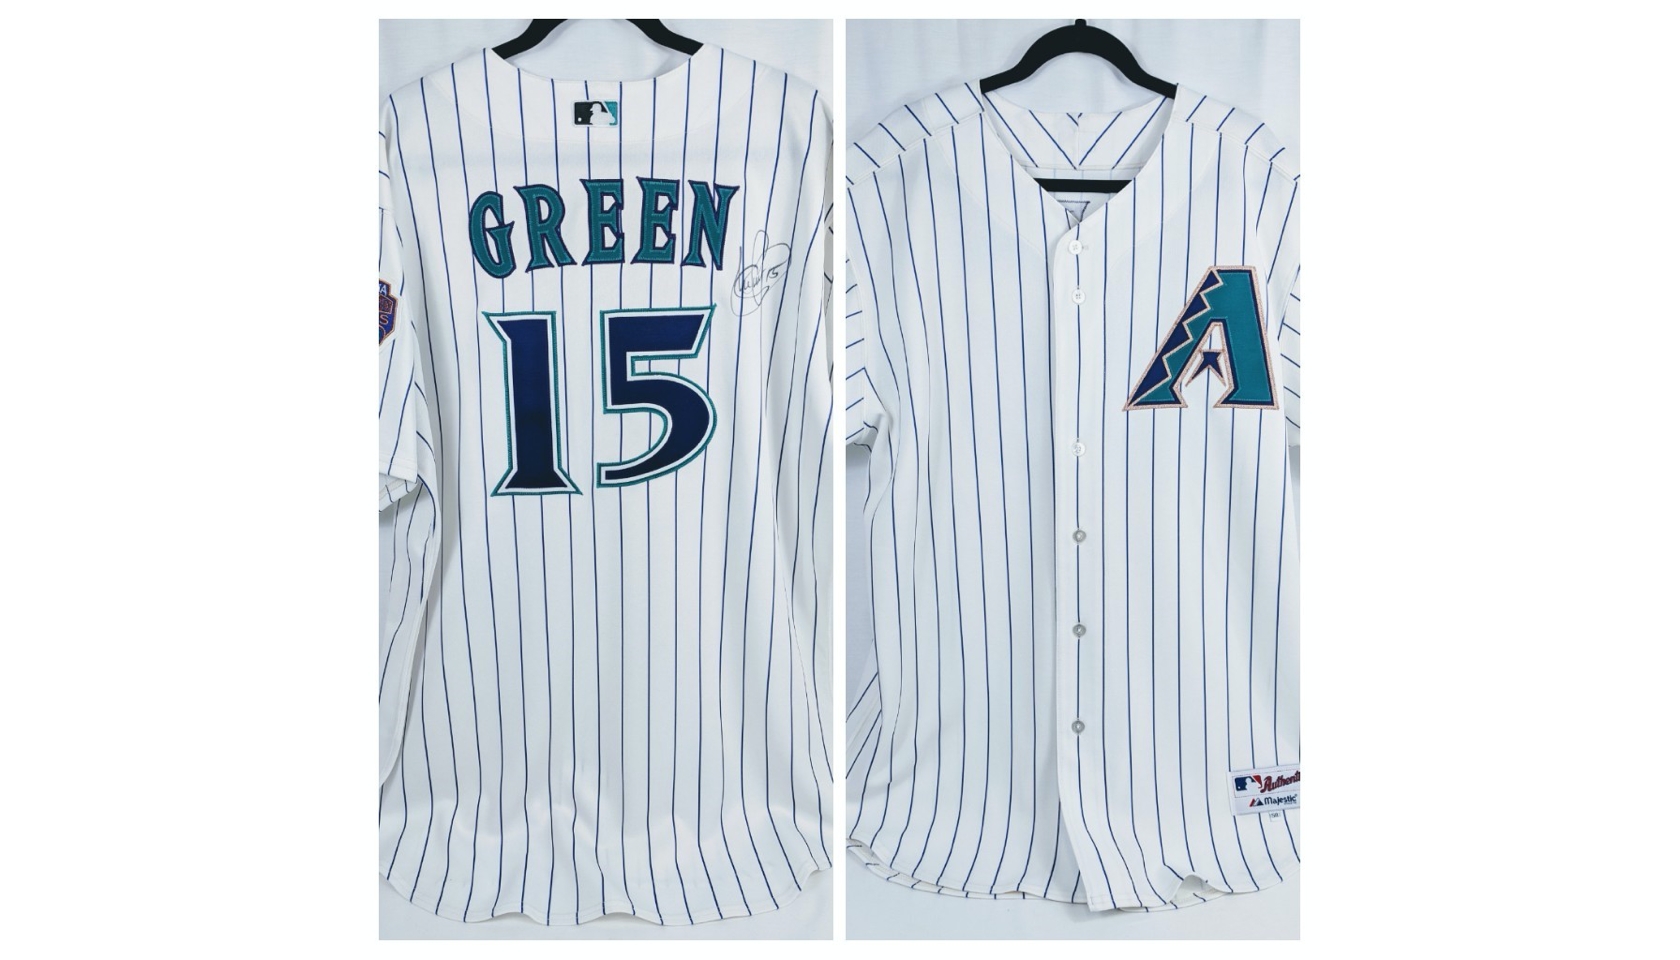 Shawn Green Los Angeles Dodgers Game Used Worn Jersey 2001 Signed - MLB  Autographed Game Used Bats at 's Sports Collectibles Store